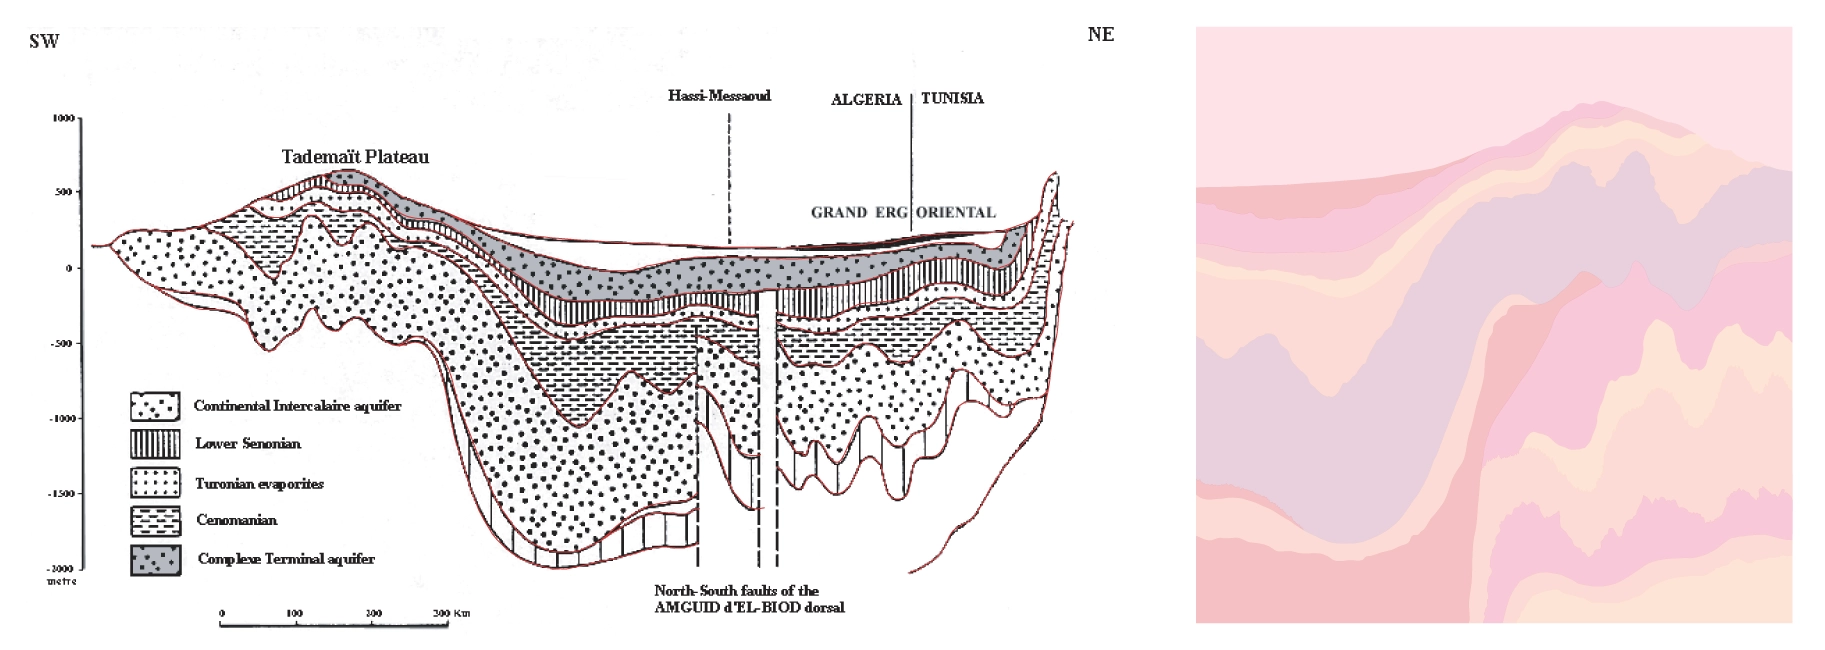 Cross-section graph of the Sahara Desert used for creating layered graphics